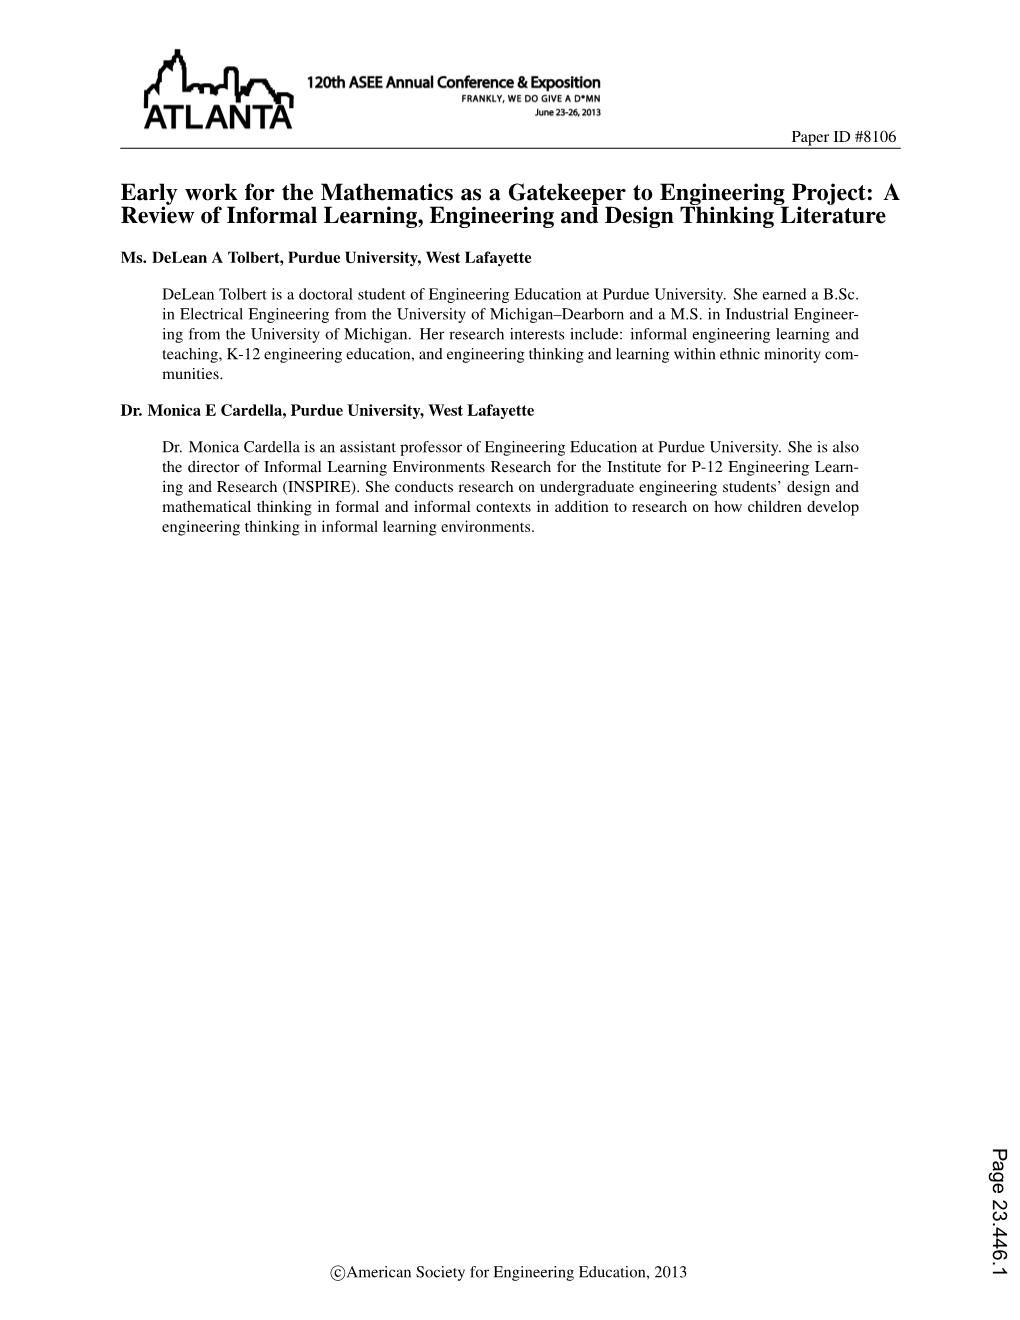 Early Work for the Mathematics As a Gatekeeper to Engineering Project: a Review of Informal Learning, Engineering and Design Thinking Literature